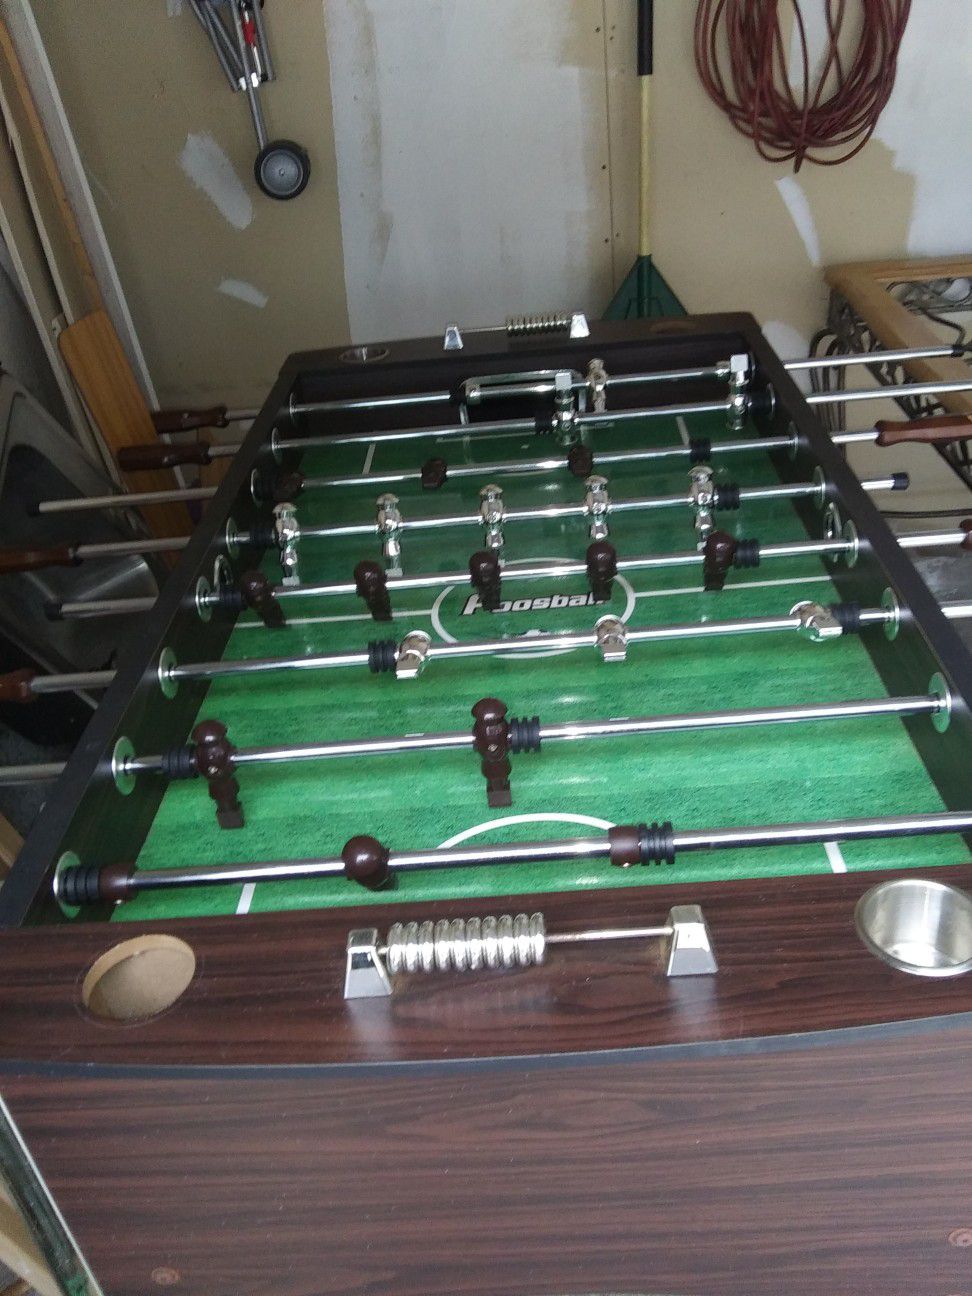 Foos ball table in good condition